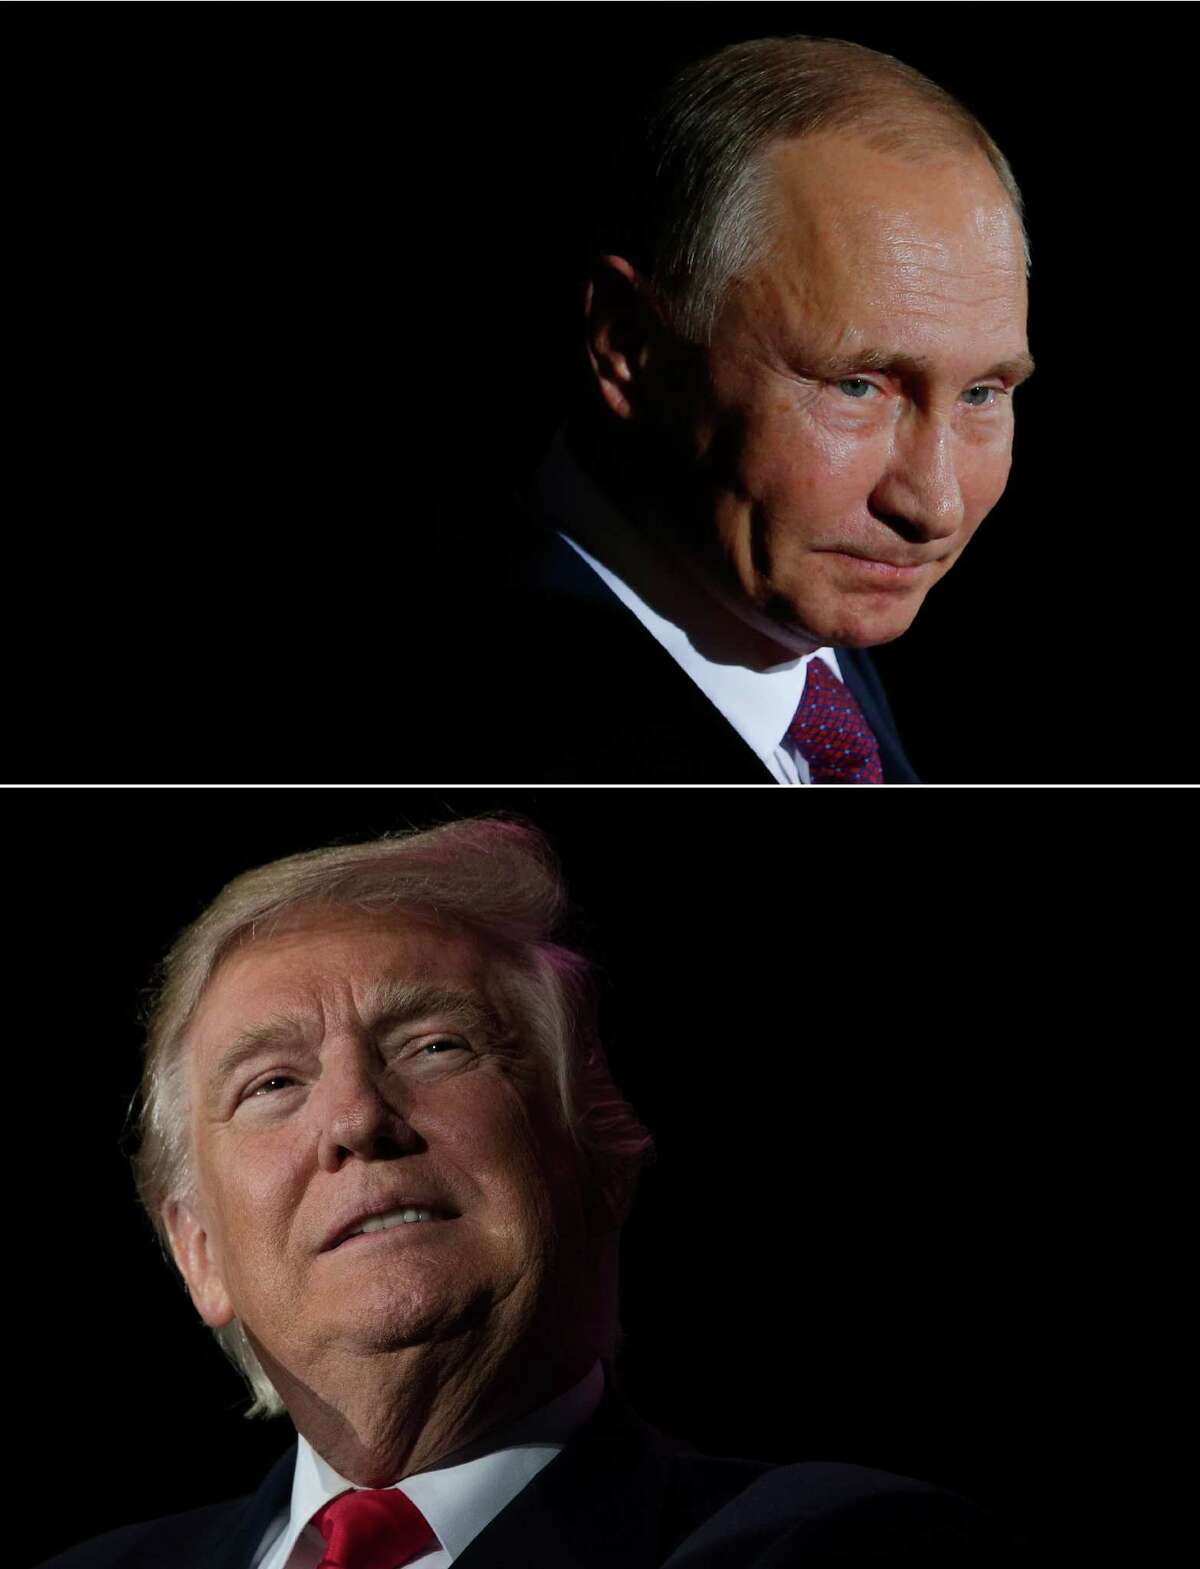 (FILES) - (COMBO) This combination of file photos created on January 16, 2017 shows US President-elect Donald Trump (December 16, 2016 in Orlando, Florida) and Russian President Vladimir Putin (top, October 19, 2016 in Berlin). Russian President Vladimir Putin is set to hold a first meeting with US leader Donald Trump on July 7, 2017 on the sidelines of the G20 summit in Hamburg, the Kremlin said on July 4, 2017. / AFP PHOTO / Odd ANDERSEN AND Jim WATSONODD ANDERSEN,JIM WATSON/AFP/Getty Images